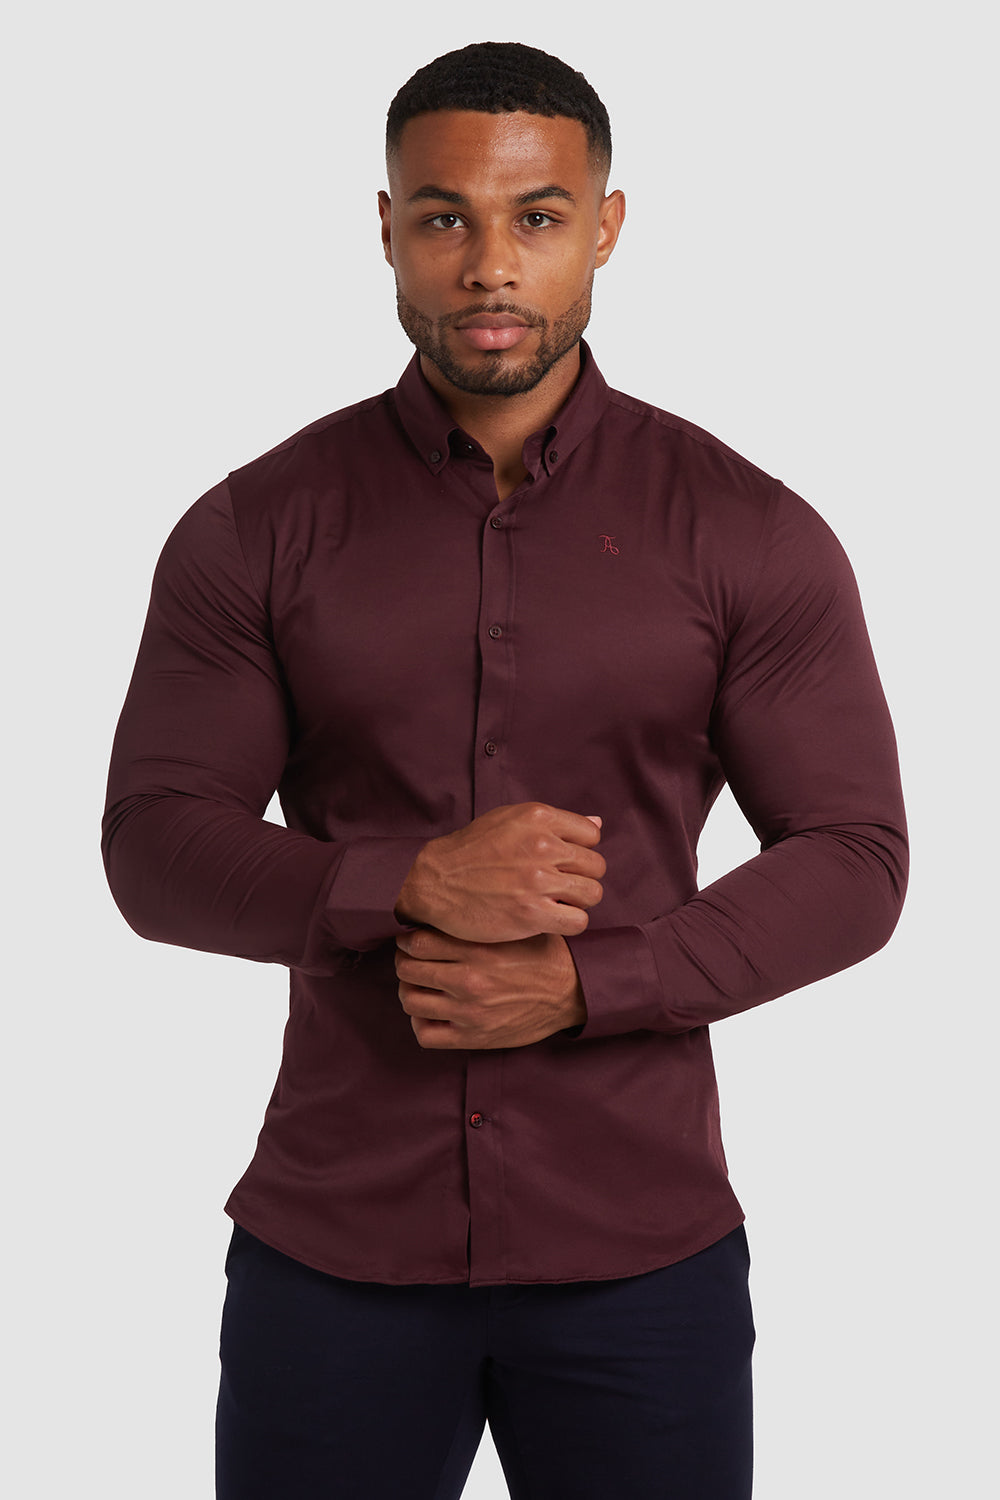 Muscle Fit Signature ATHLETE 2.0 - TAILORED in Shirt USA Burgundy 